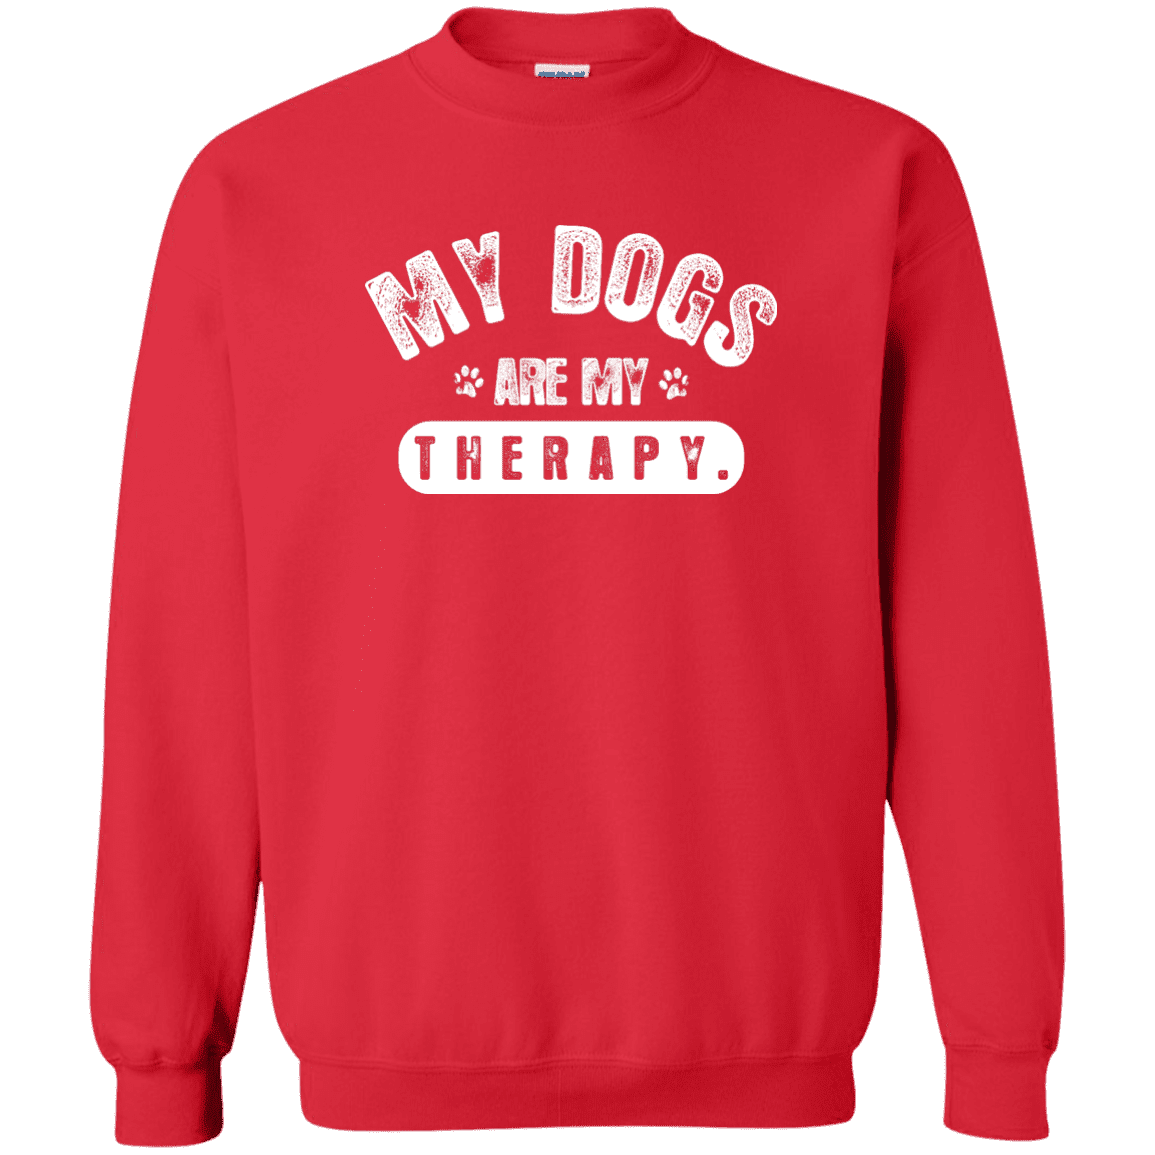 My Dogs Are My Therapy - Sweatshirt.